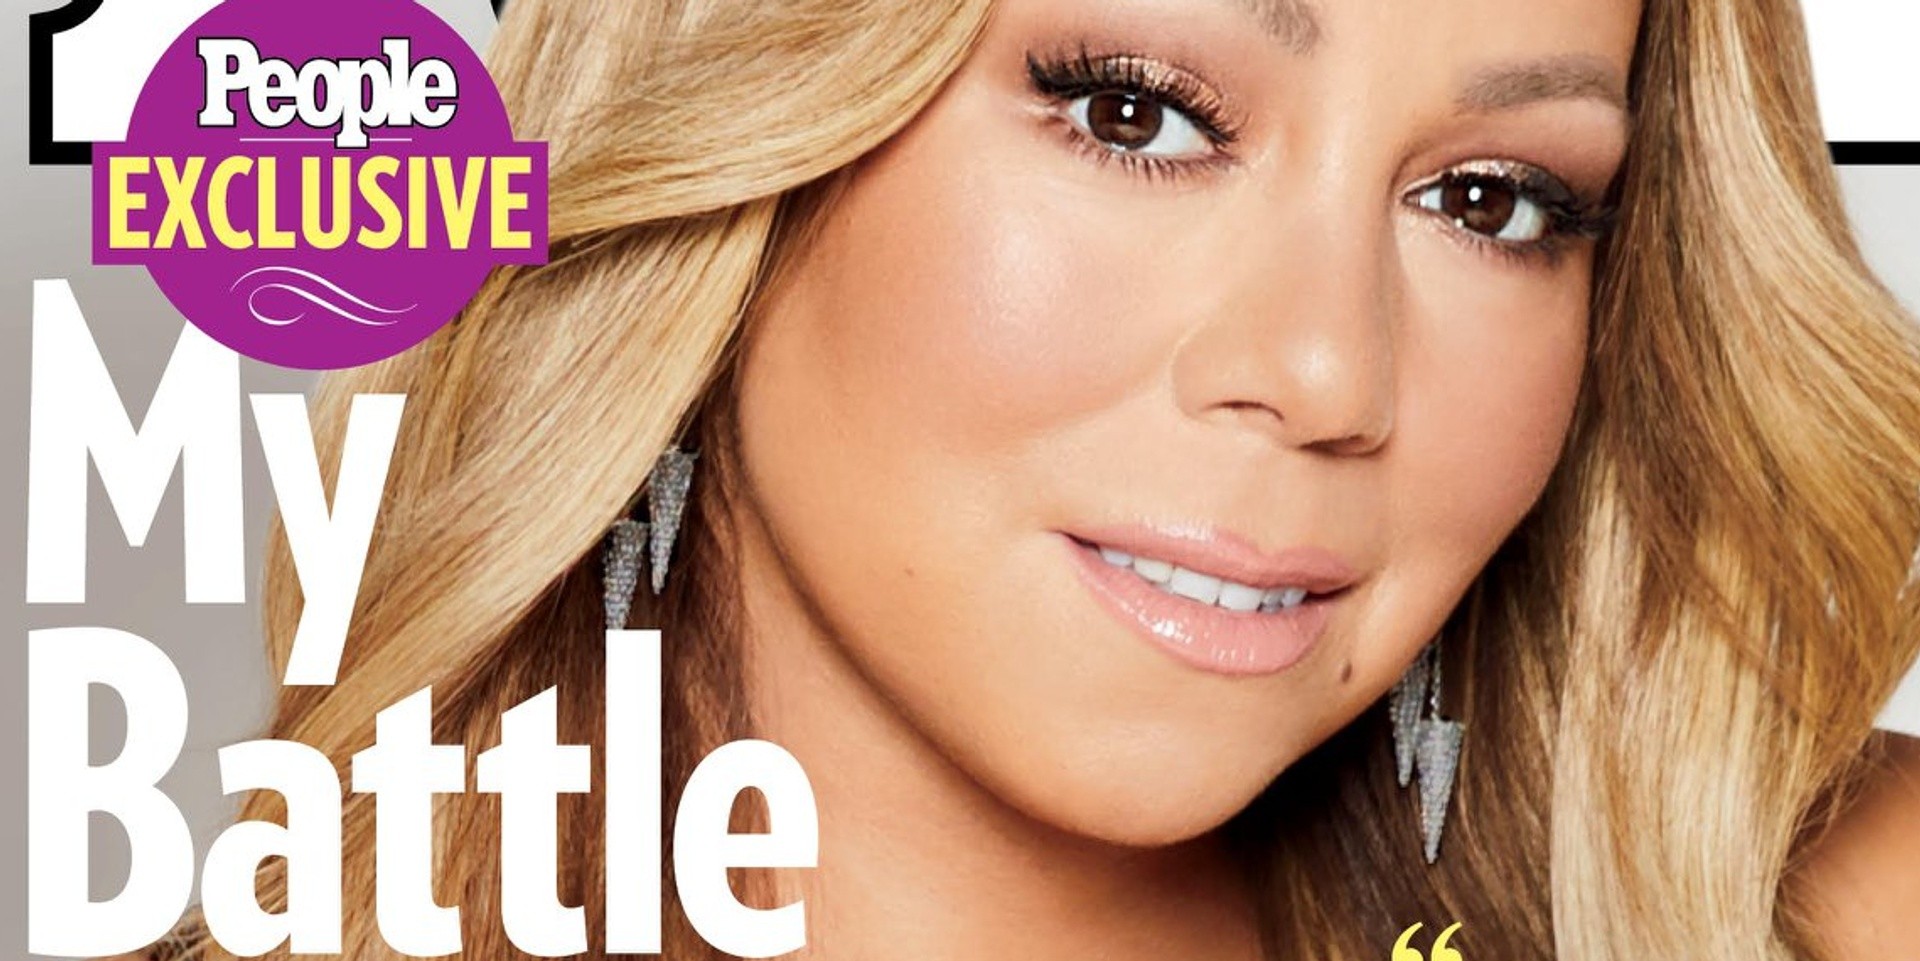 Mariah Carey opens up about living with bipolar disorder for the first time